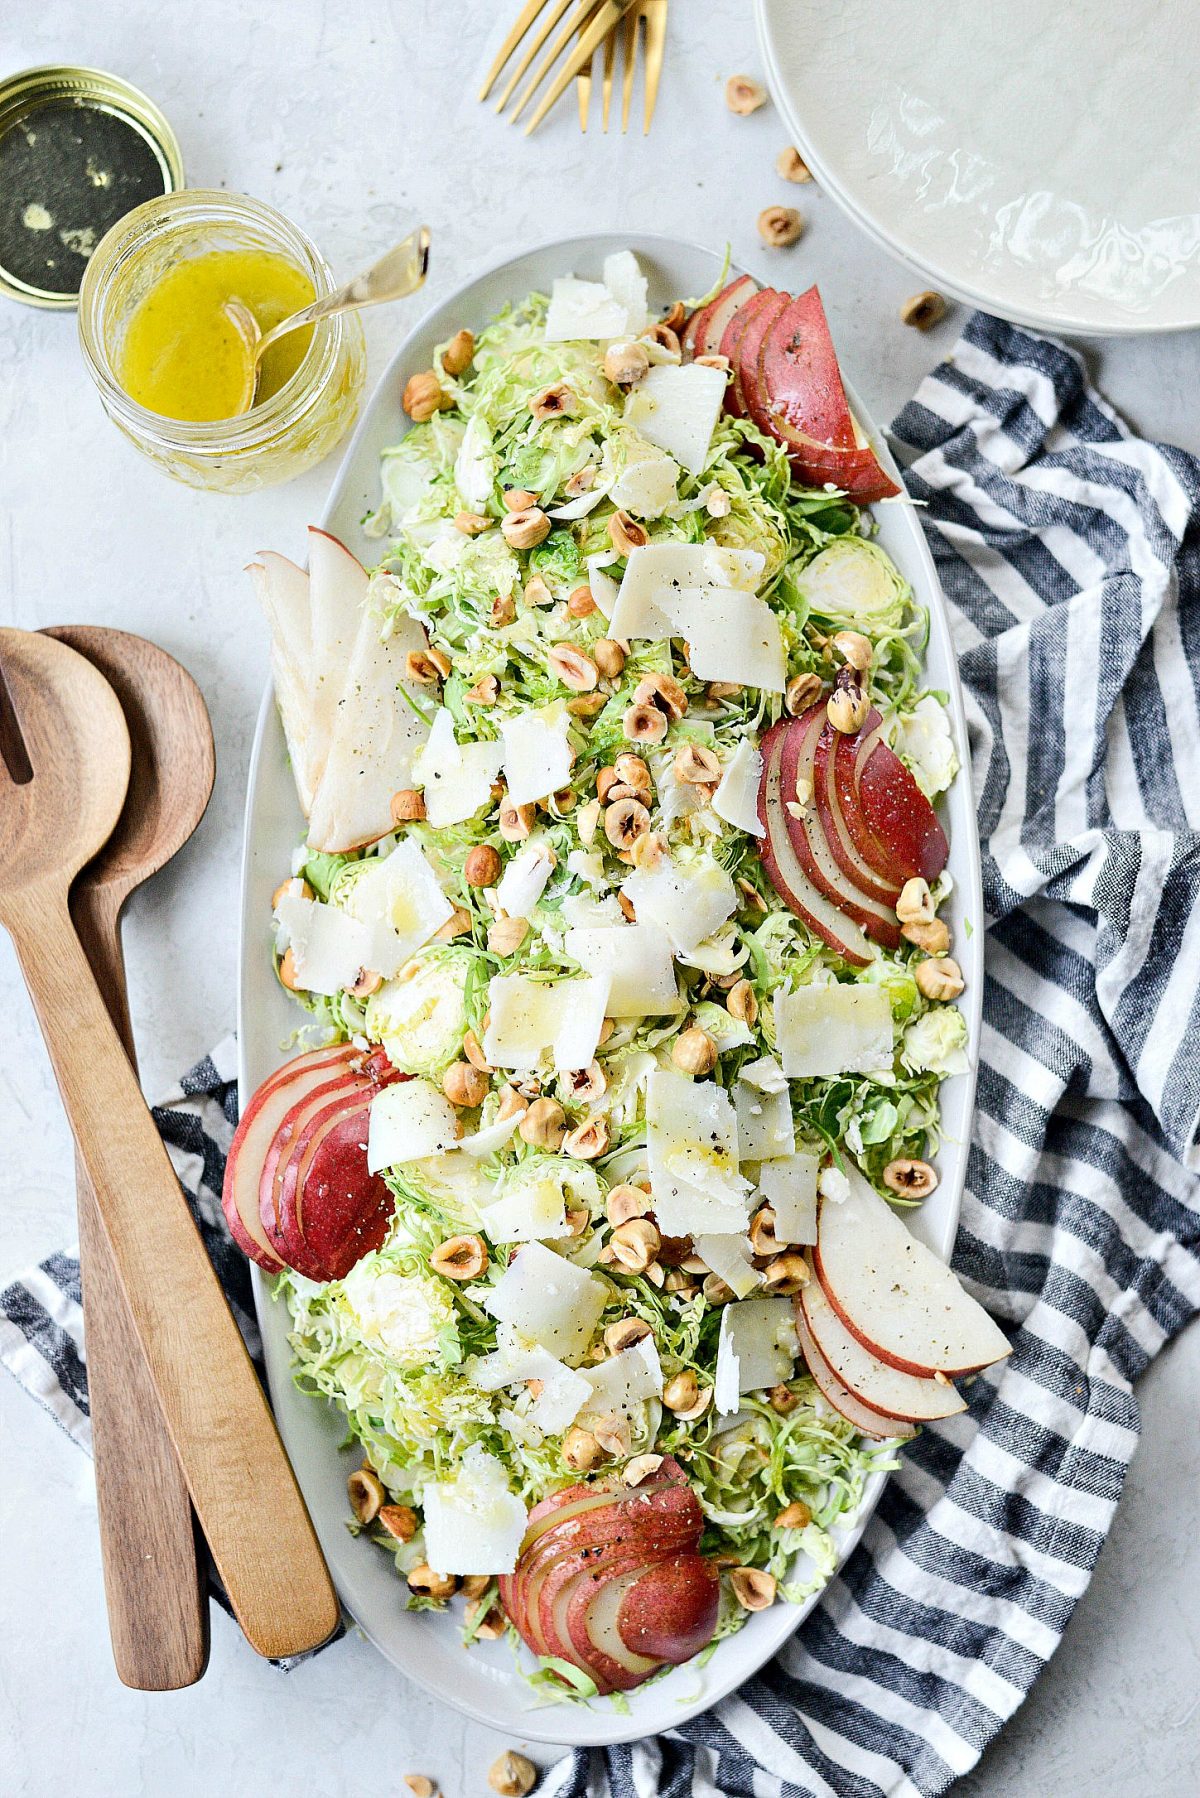 Shaved-Brussels-Sprout-Salad-with-Pear-Parmesan-and-Hazelnuts-l-SimplyScratch.com-10